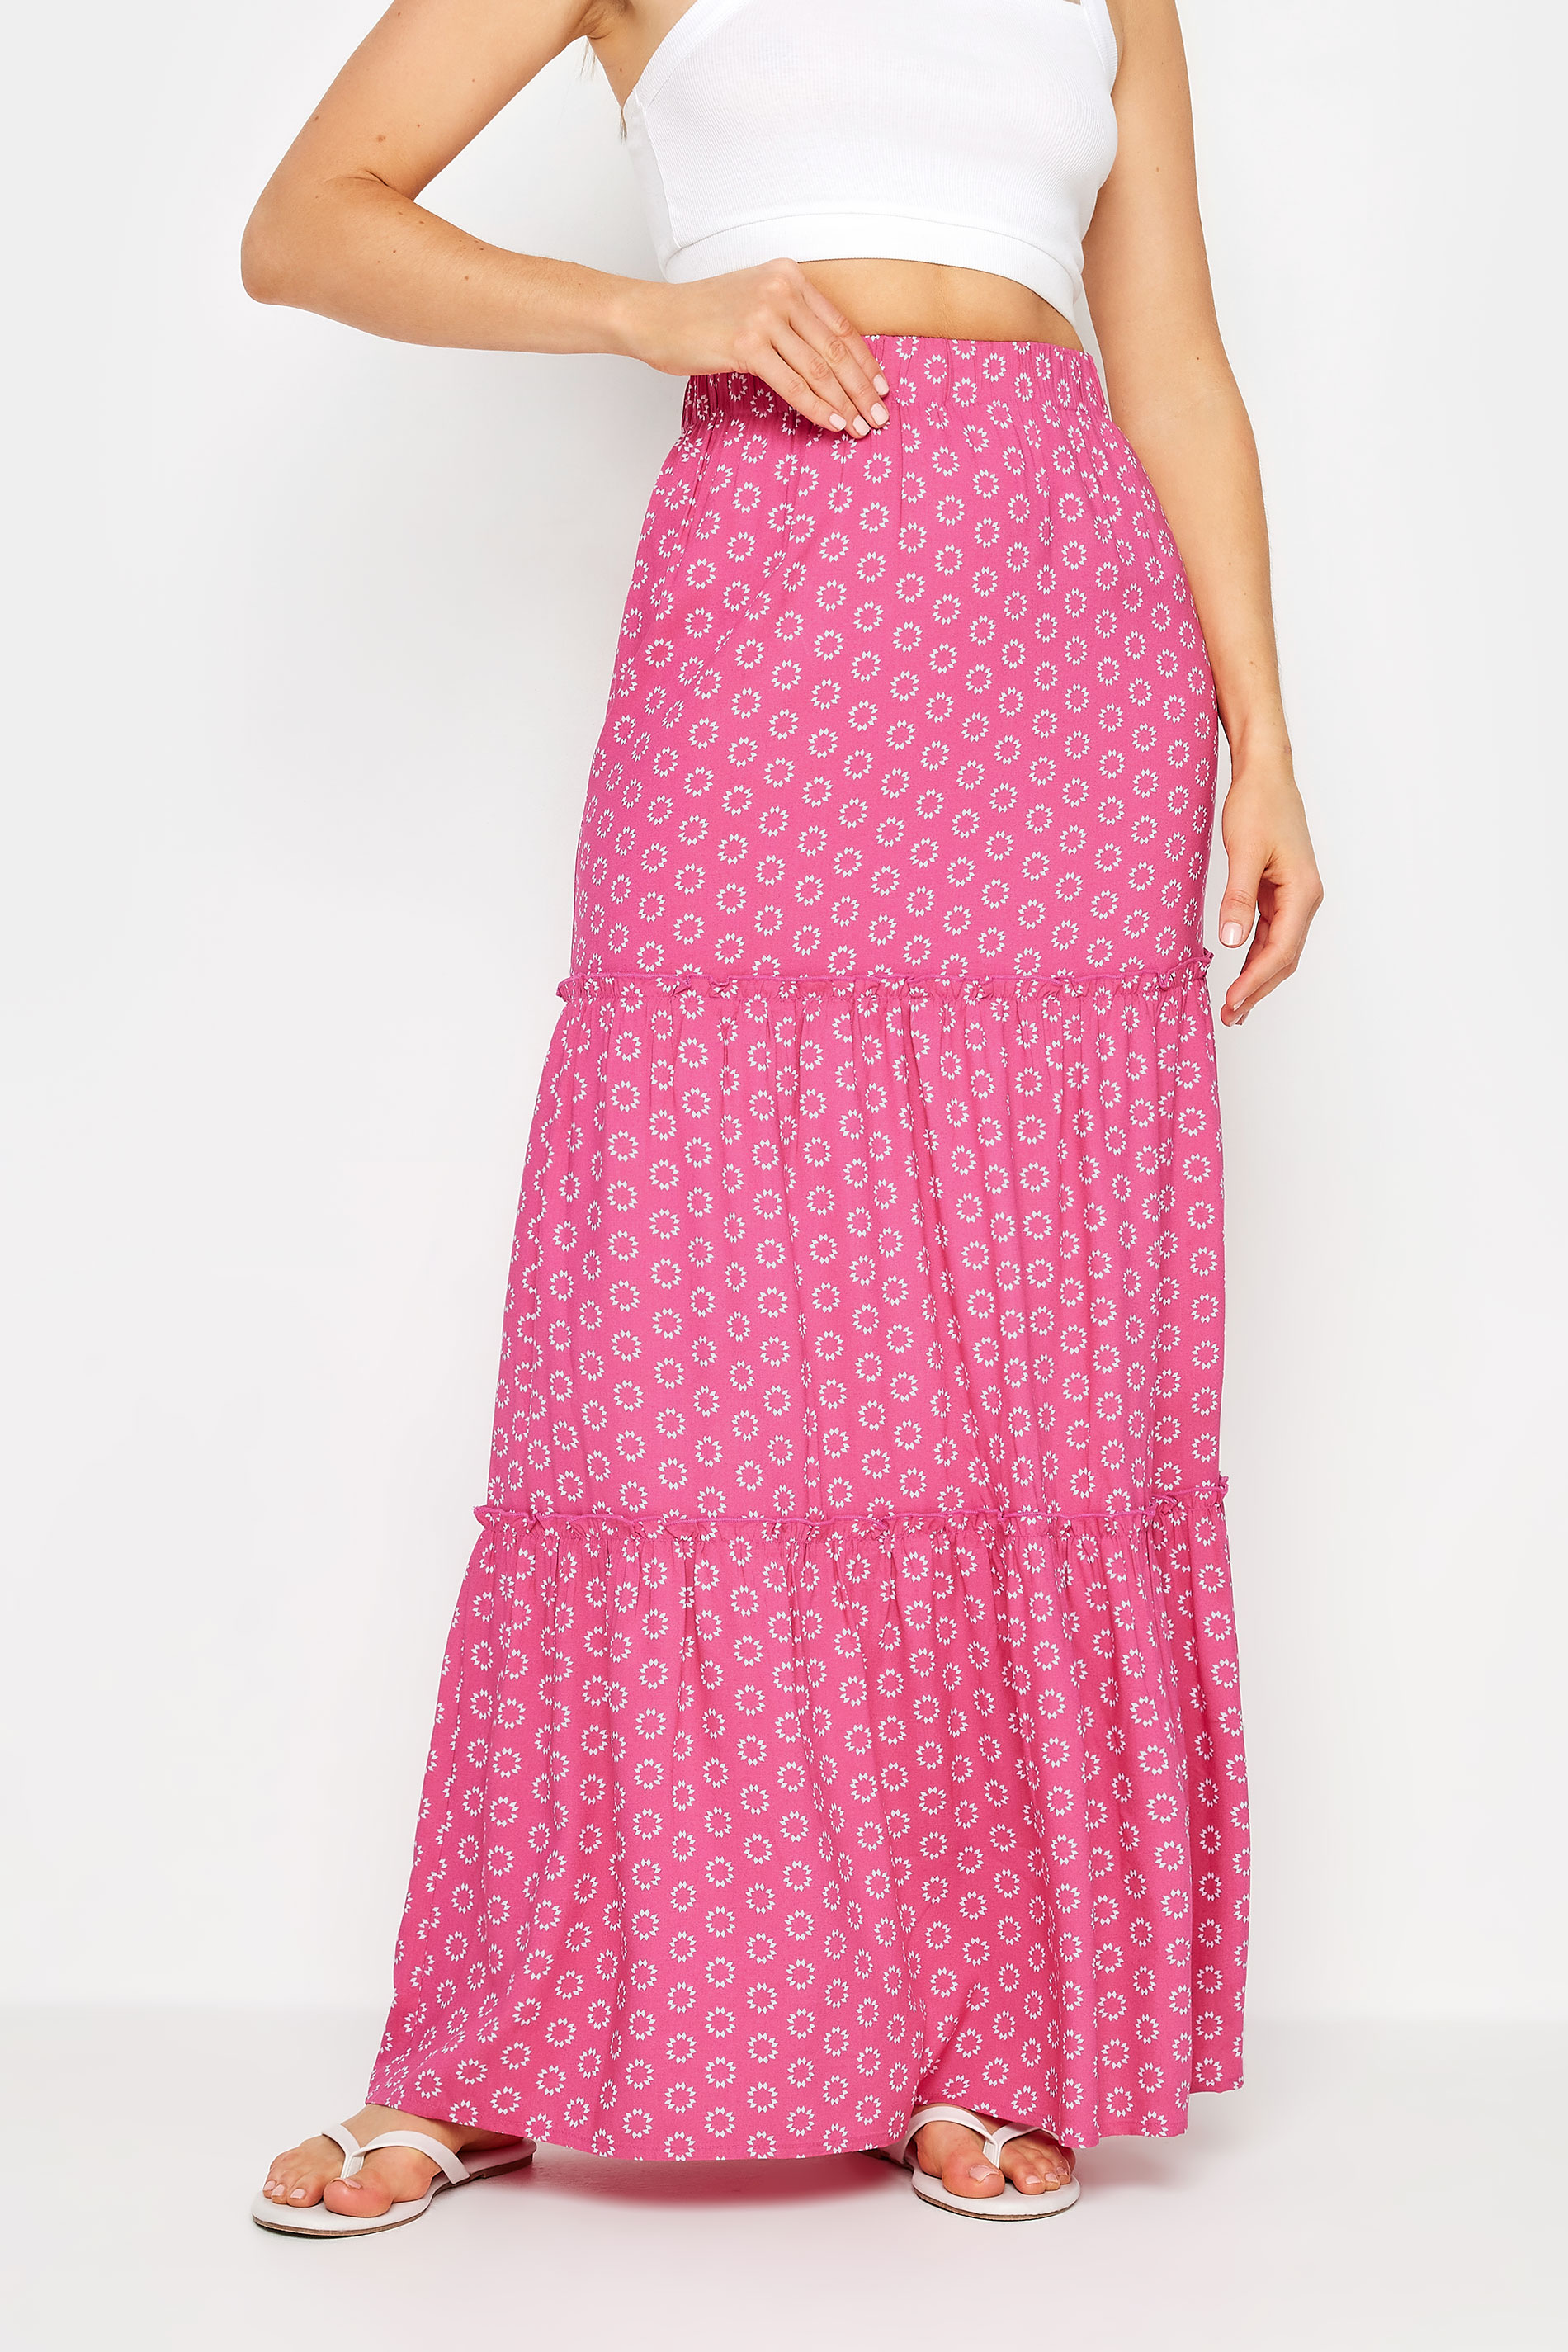 LTS Tall Women's Pink Abstract Floral Print Tiered Maxi Skirt | Long Tall Sally 2